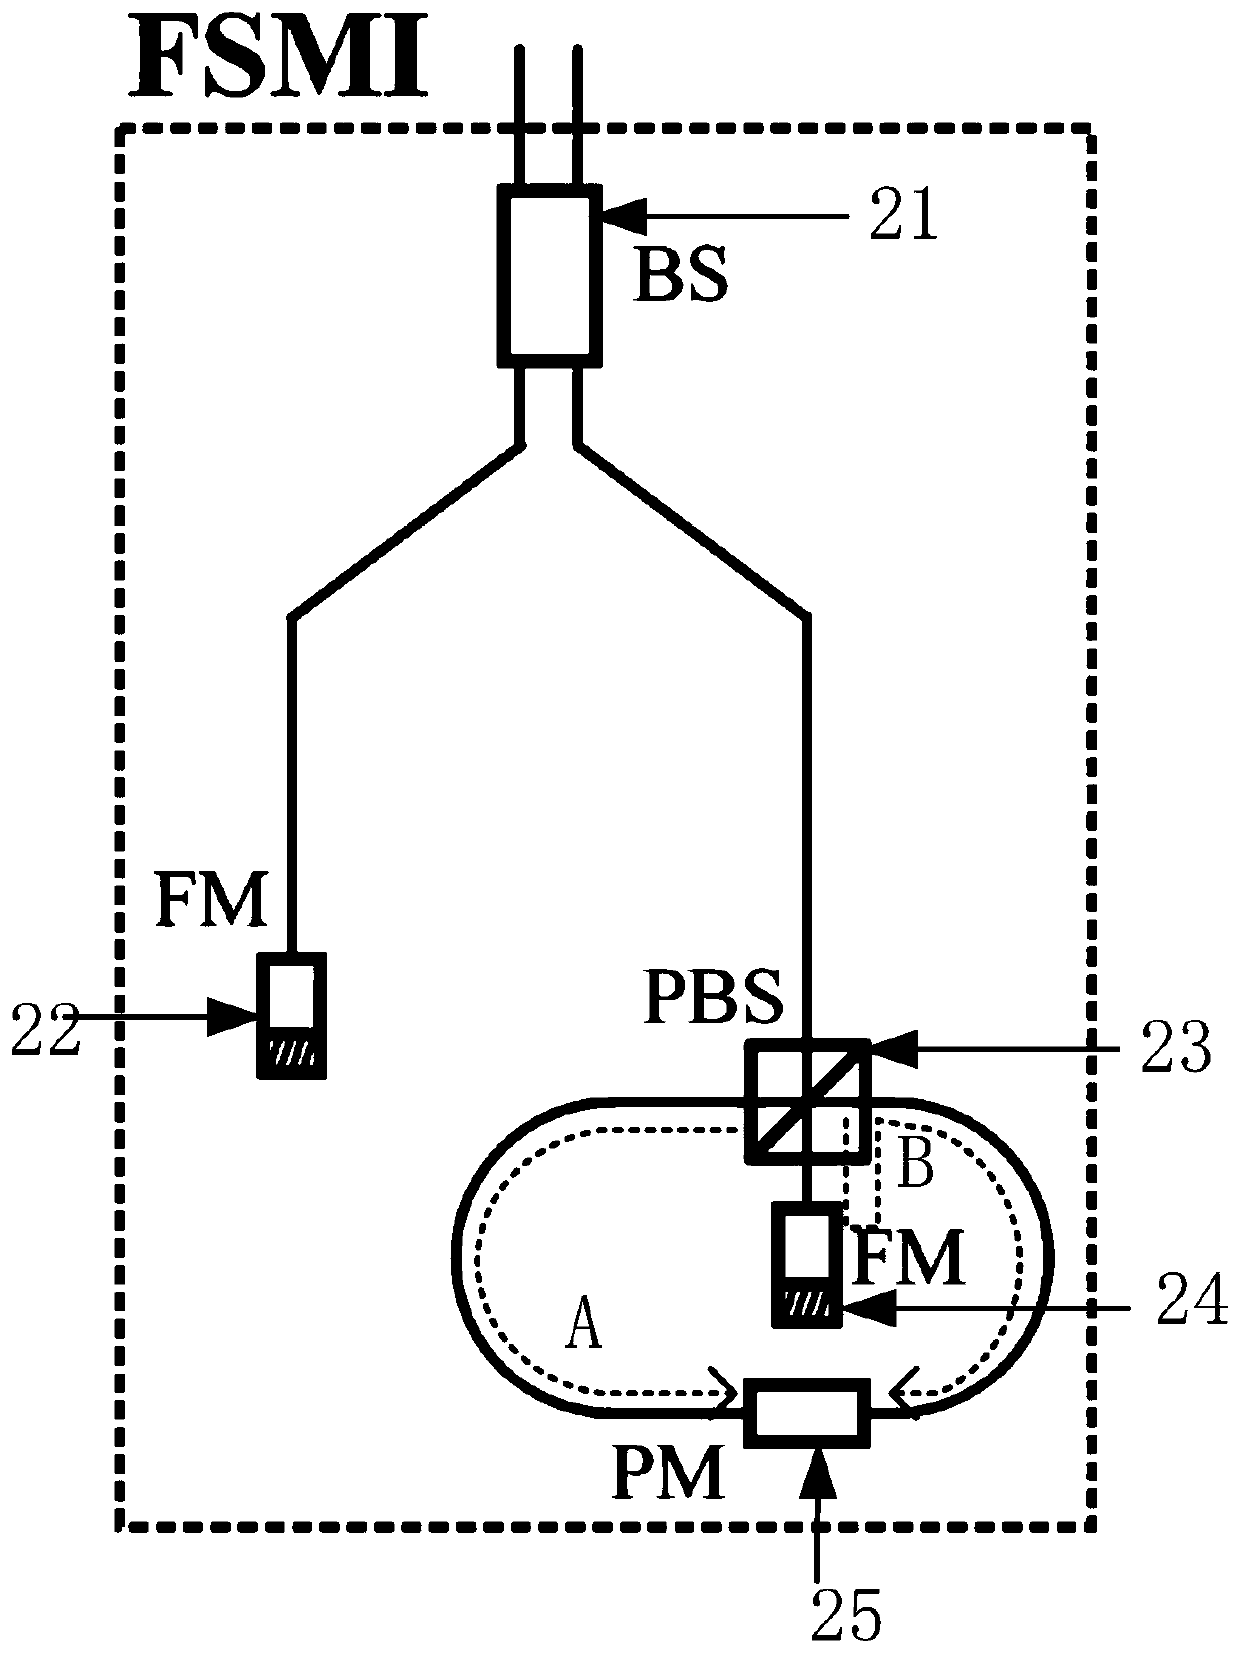 A phase codec and quantum key distribution system